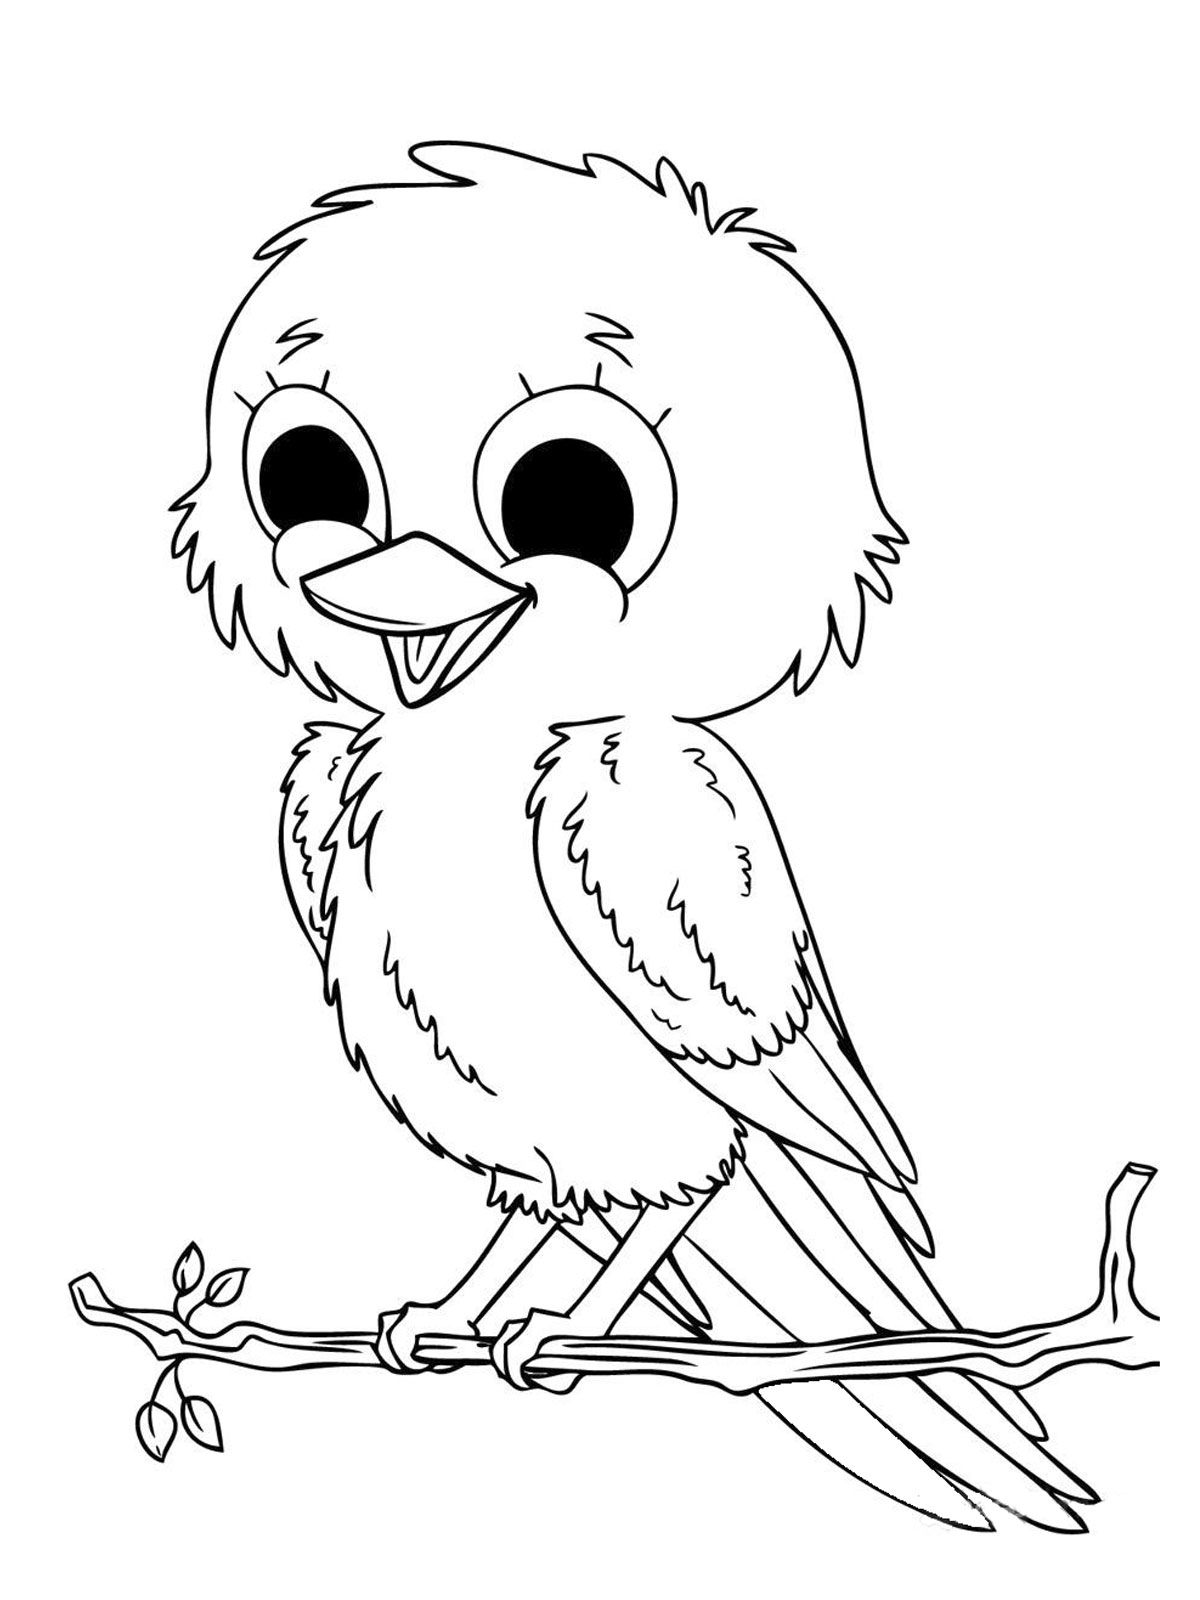 animal-coloring-pages-best-coloring-pages-for-kids